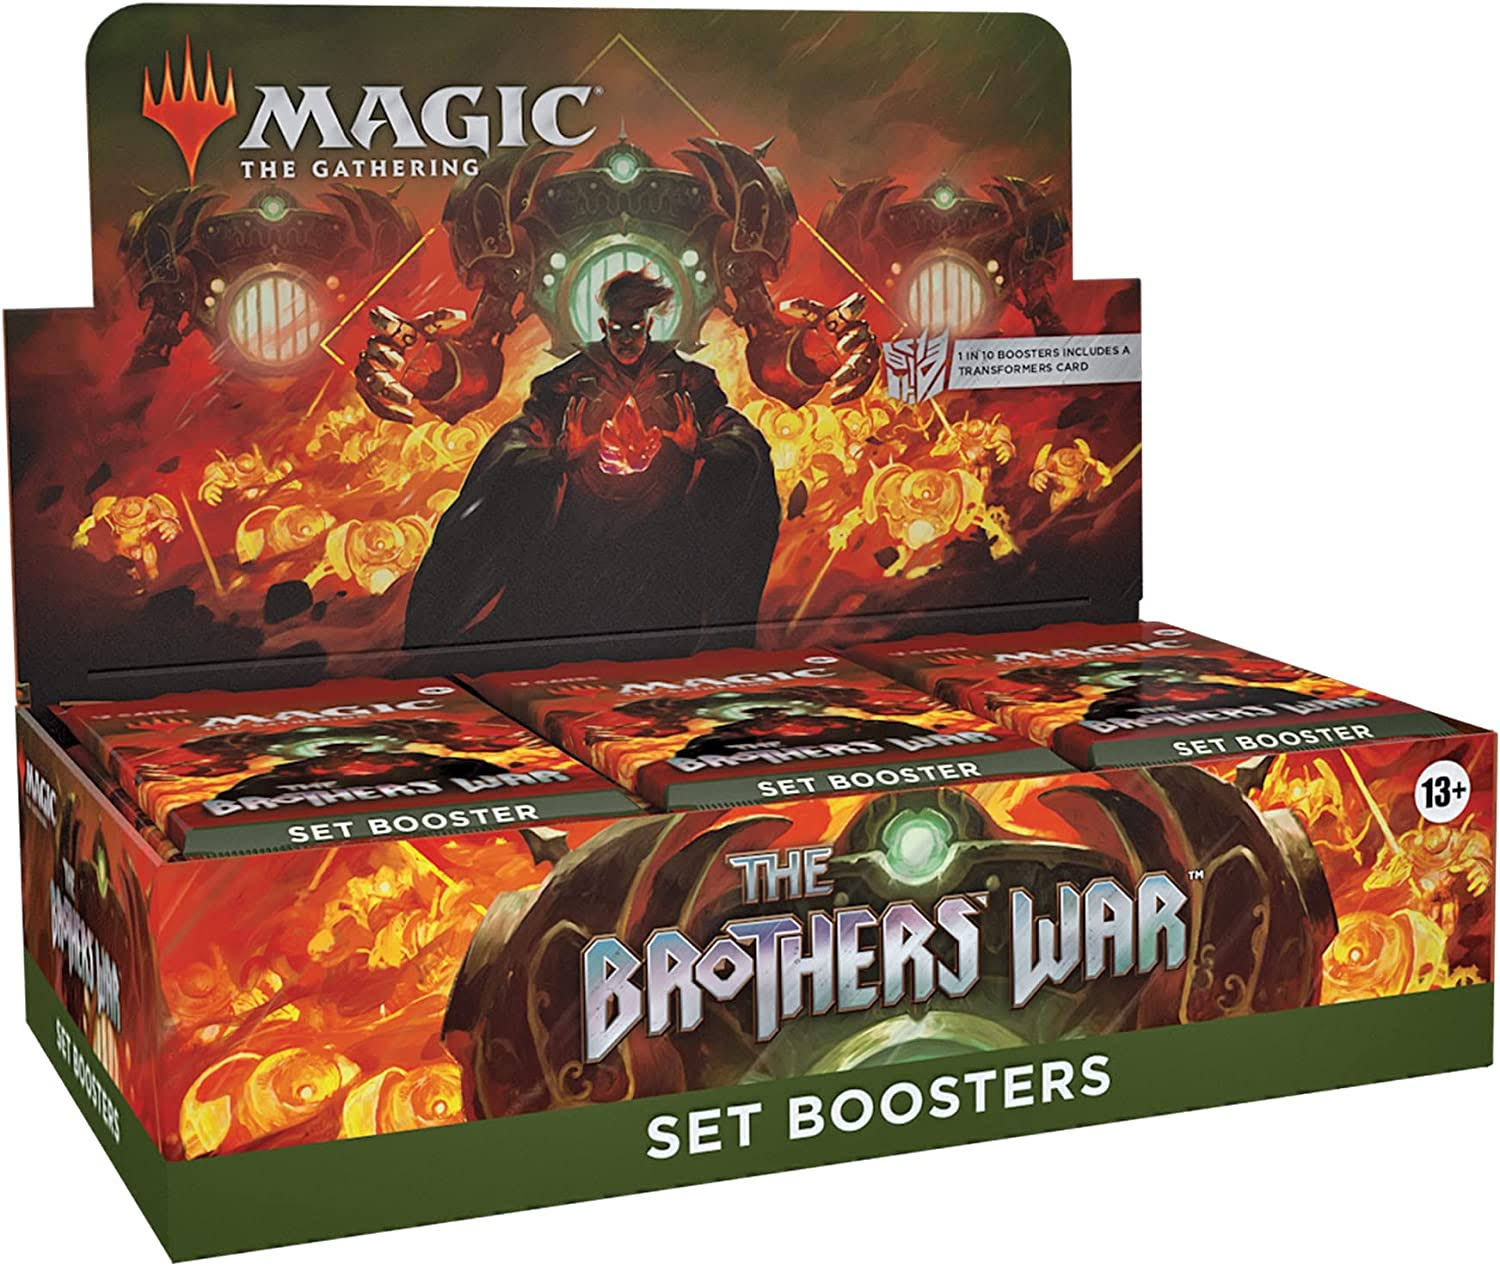 Magic The Gathering: The Brothers War Set Booster Box